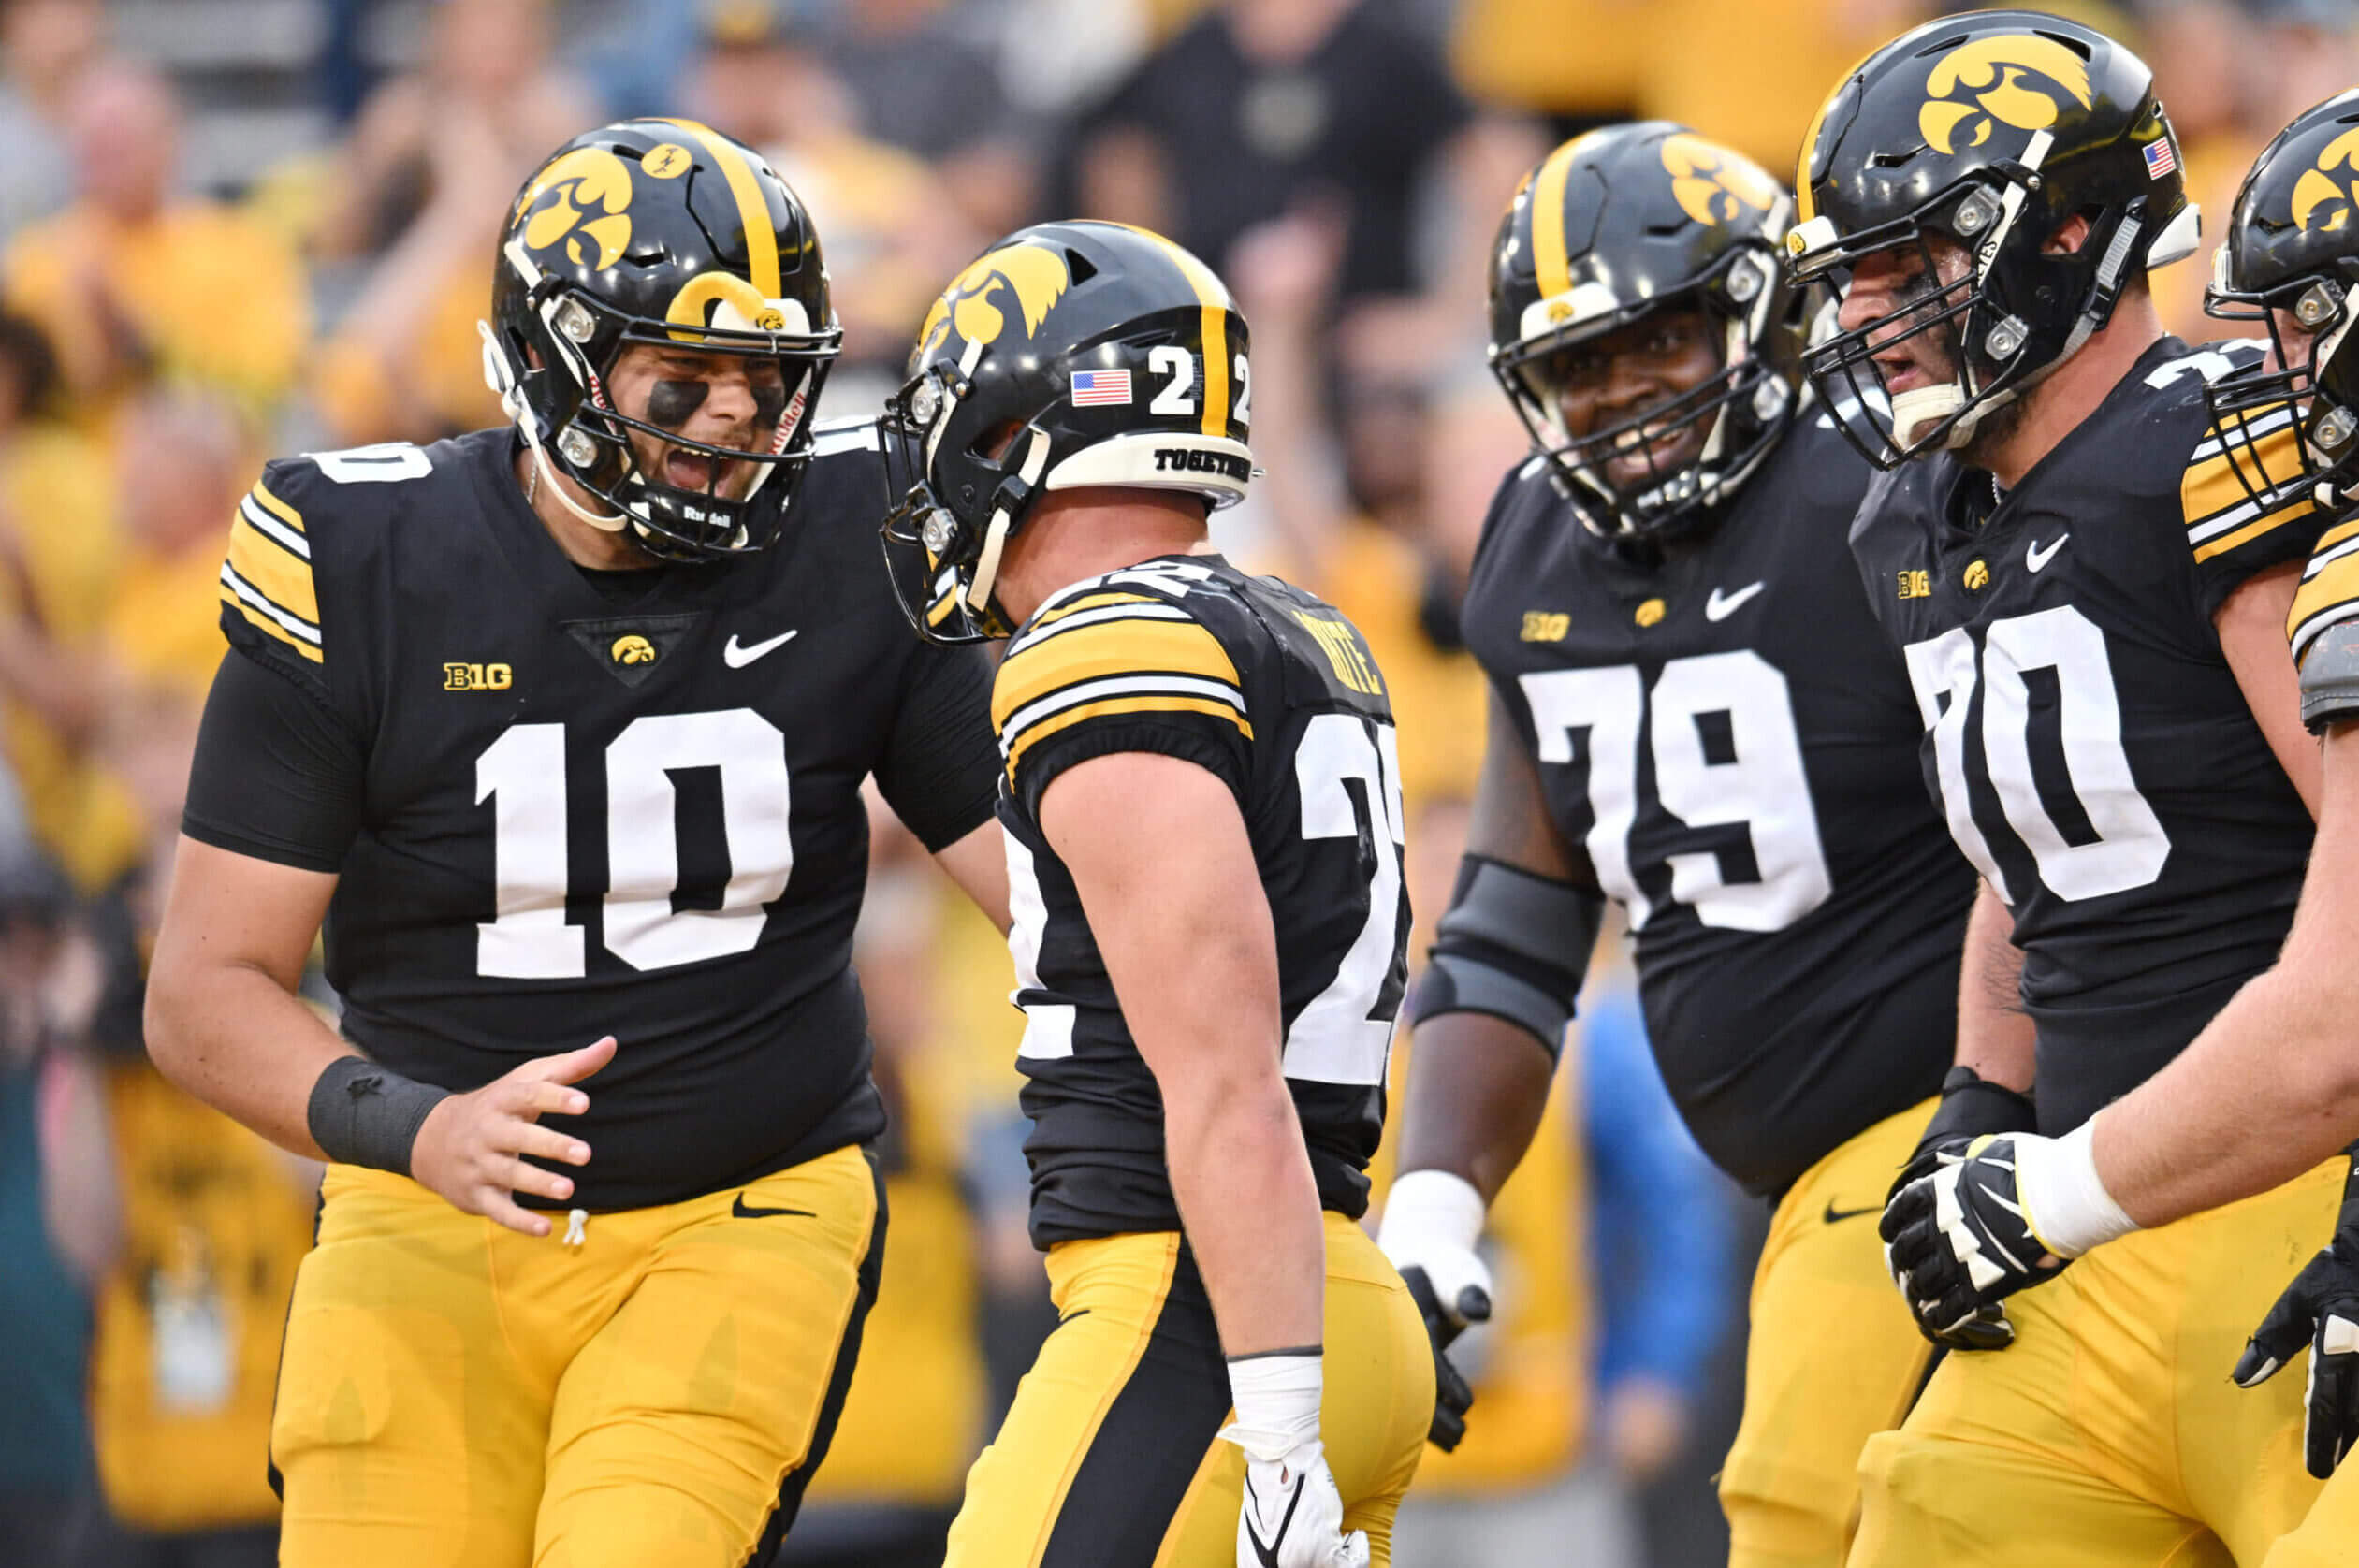 Deacon Hill’s winding road takes him back to Wisconsin as Iowa’s